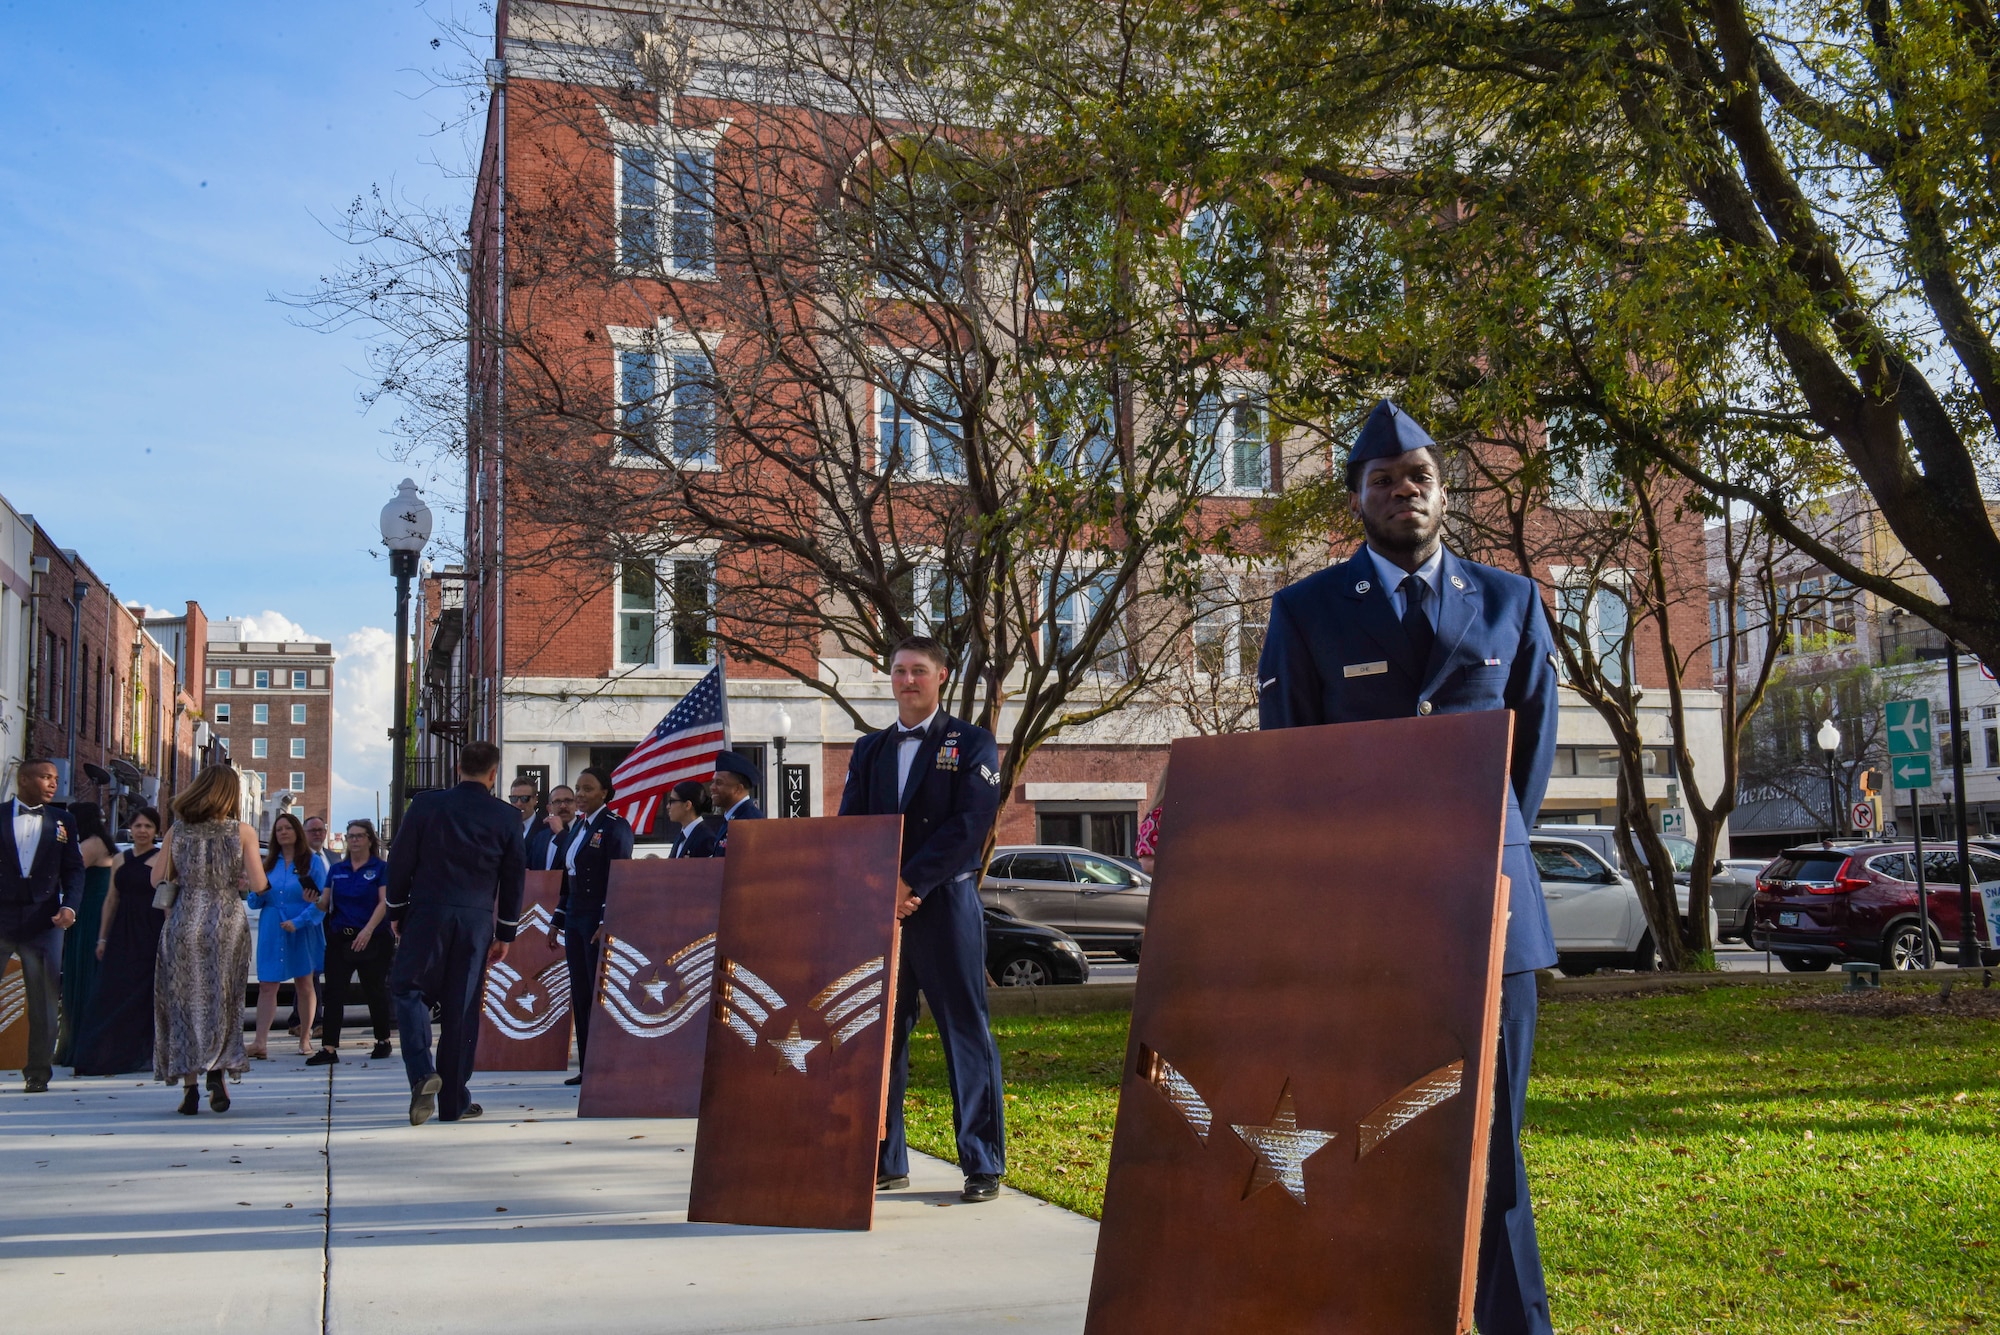 Airmen from Moody Air Force Base stand in representation of their rank during a Chief Recognition Ceremony in Valdosta, Georgia, March 16, 2023. The advancement in rank to chief master sergeant is an endeavor of commitment and can take at minimum of 18 years to accomplish. (U.S. Air Force Photo by Airman 1st Class Sir Wyrick)